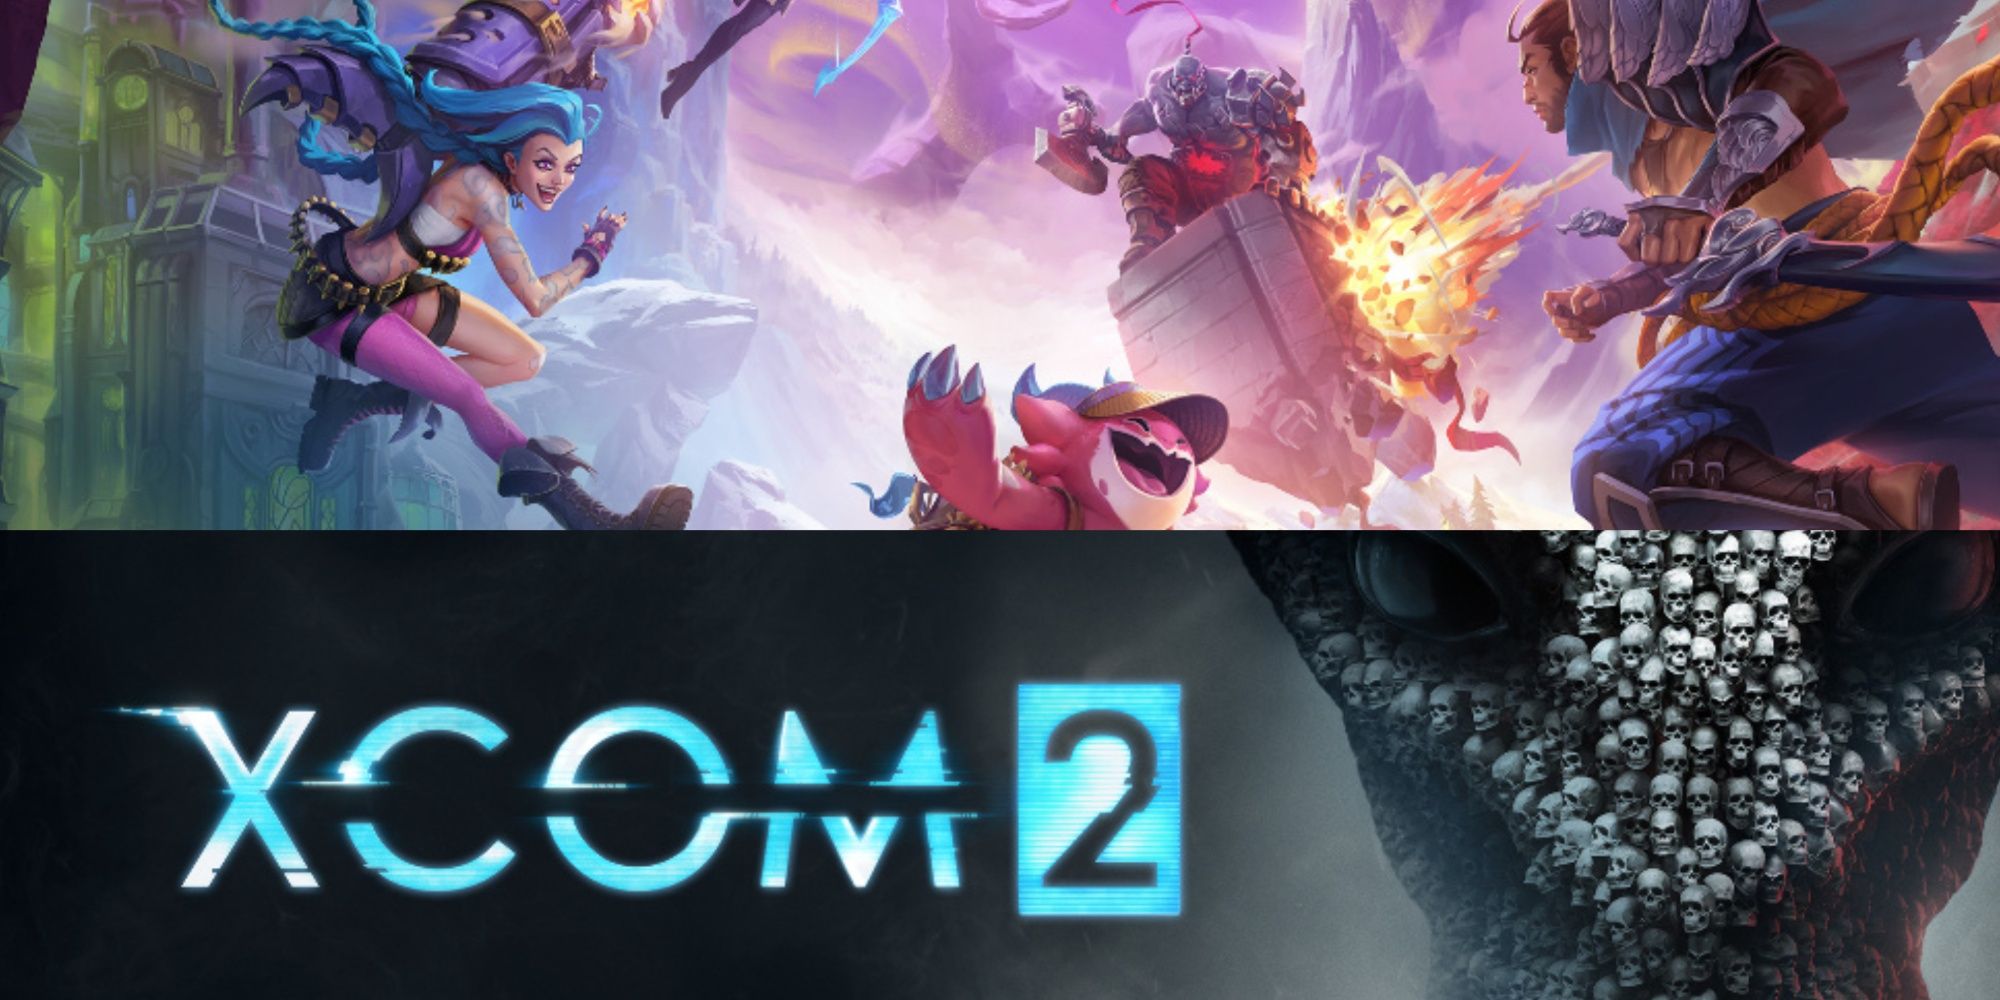 A split image with the top being characters from Leage of Legends fighting and the bottom with the logo of XCOM 2